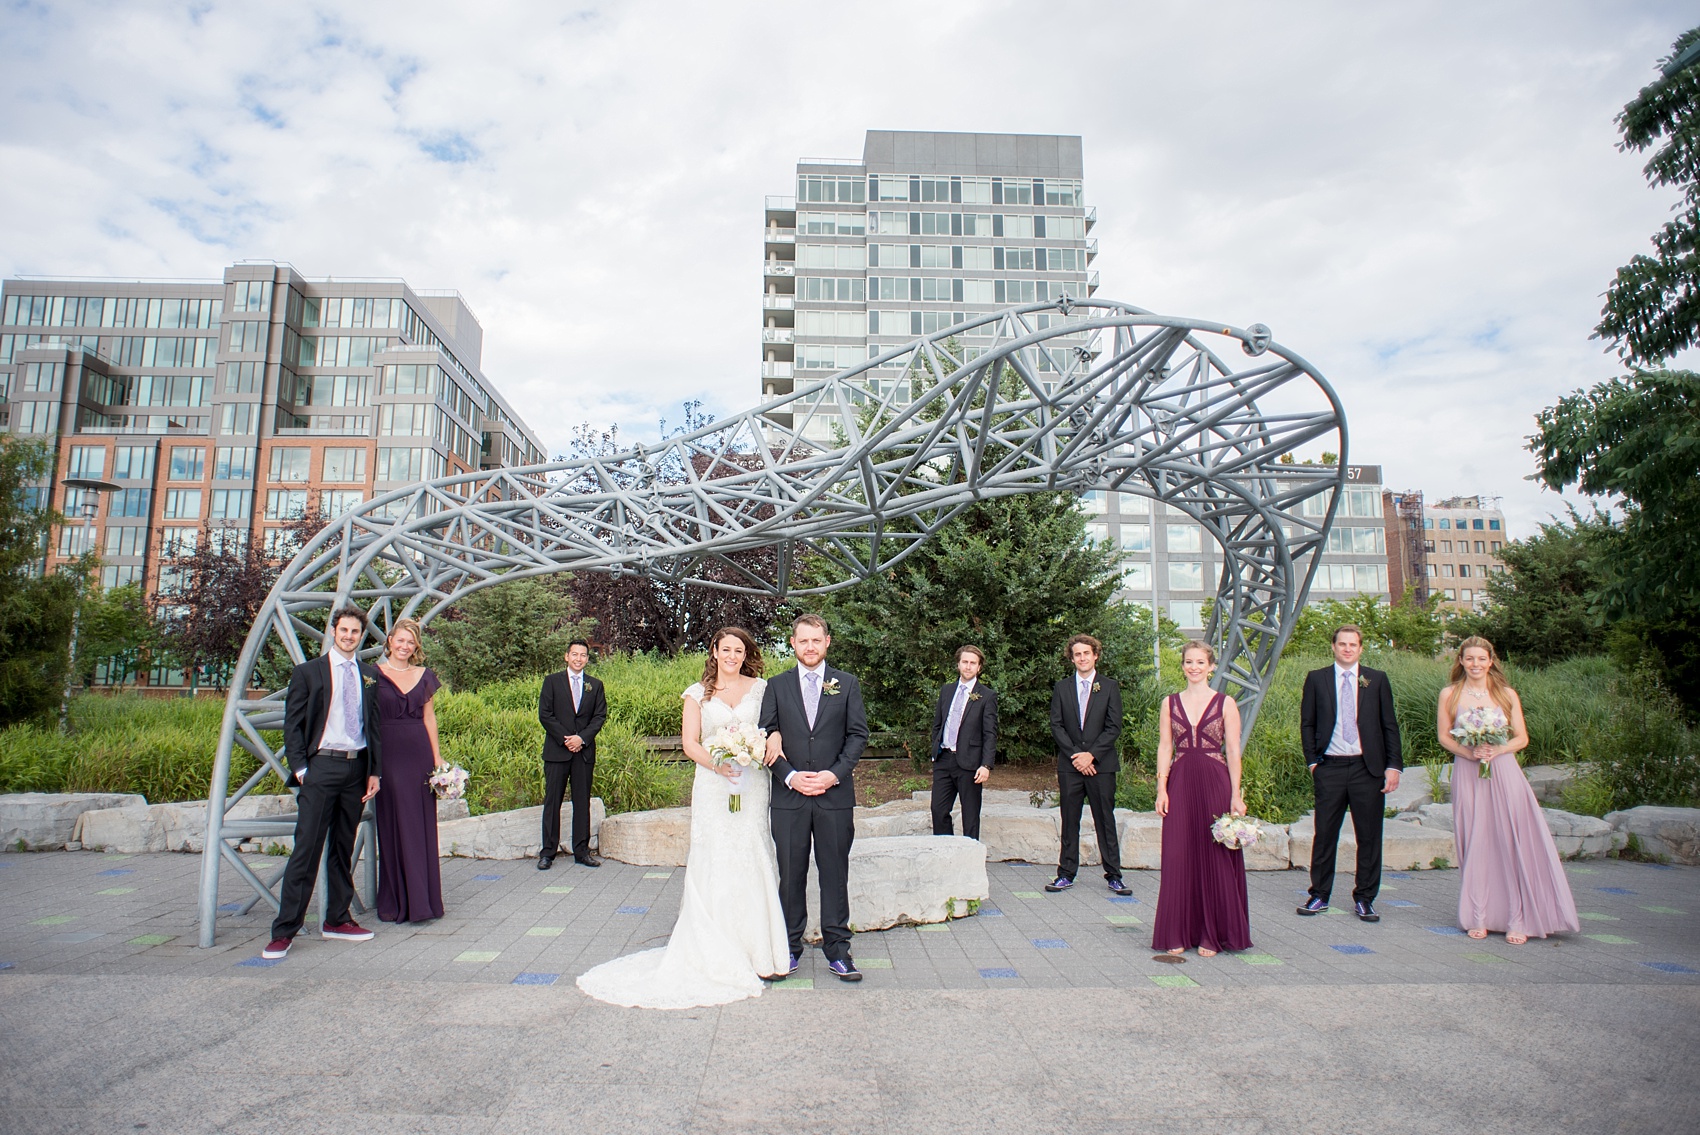 Mikkel Paige Photography photos of a NYC wedding at Tribeca Rooftop. An image of the wedding party/bridal party with a sculpture at Hudson River Park.